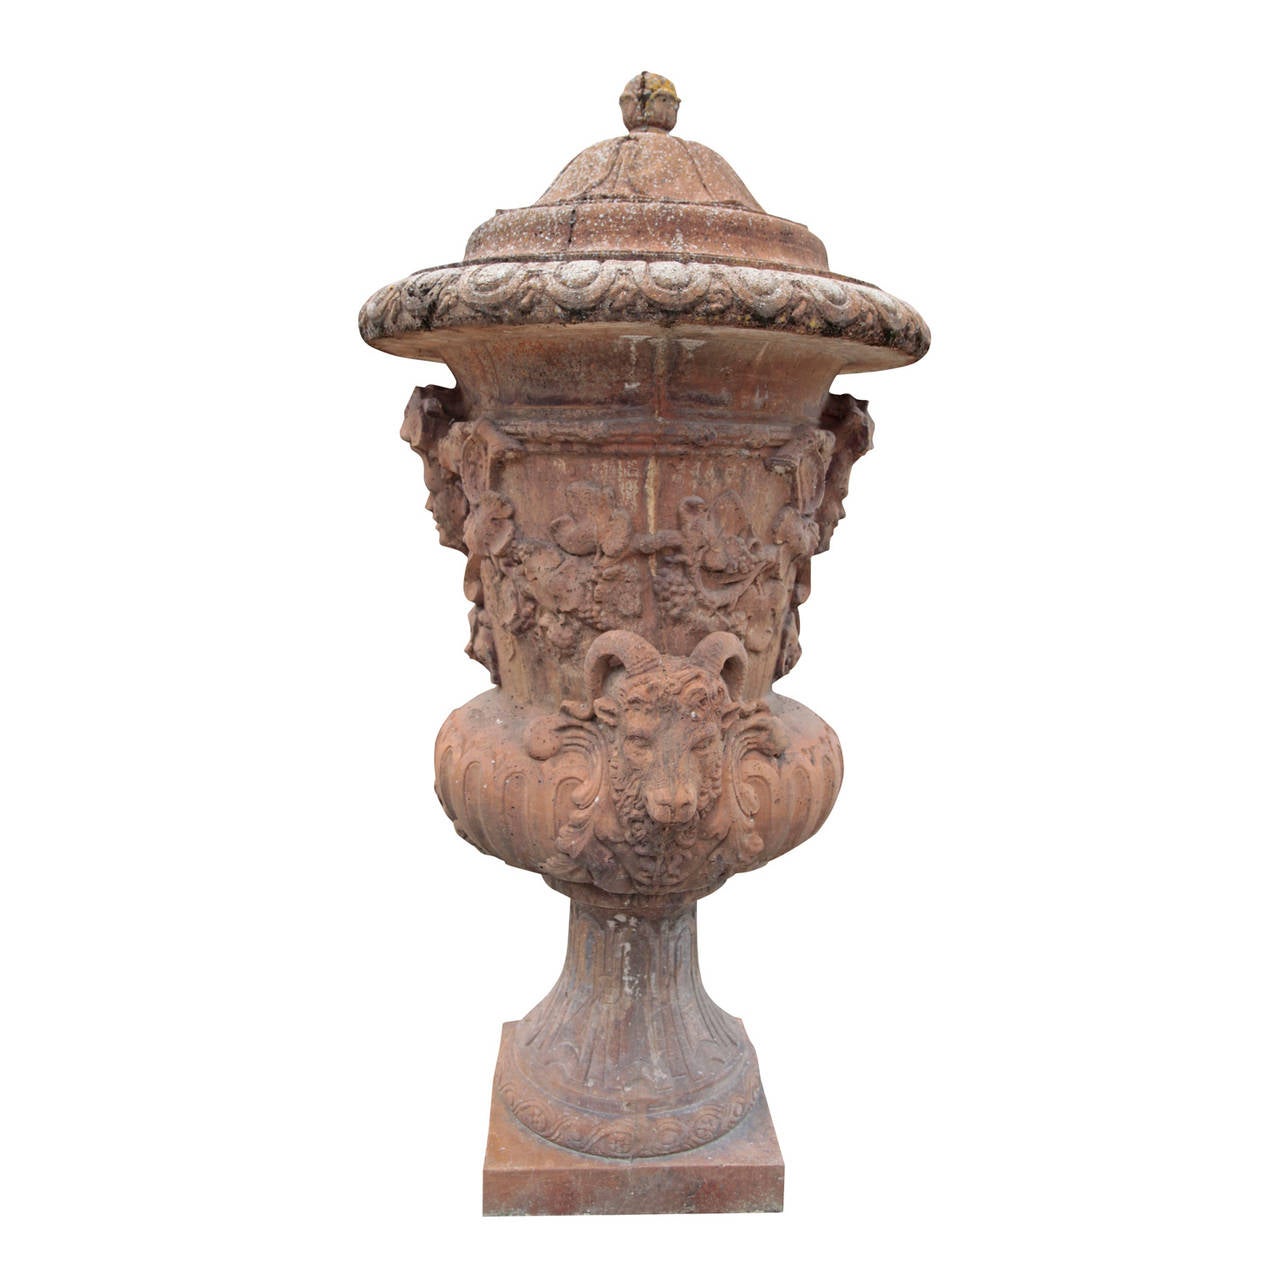 The urn stands on a square plinth. The foot and belly are fluted, while the body is decorated with plastically formed, Dionysian décor. The top lip is decorated with a cymatium and a bell-shaped lid with a small knop.